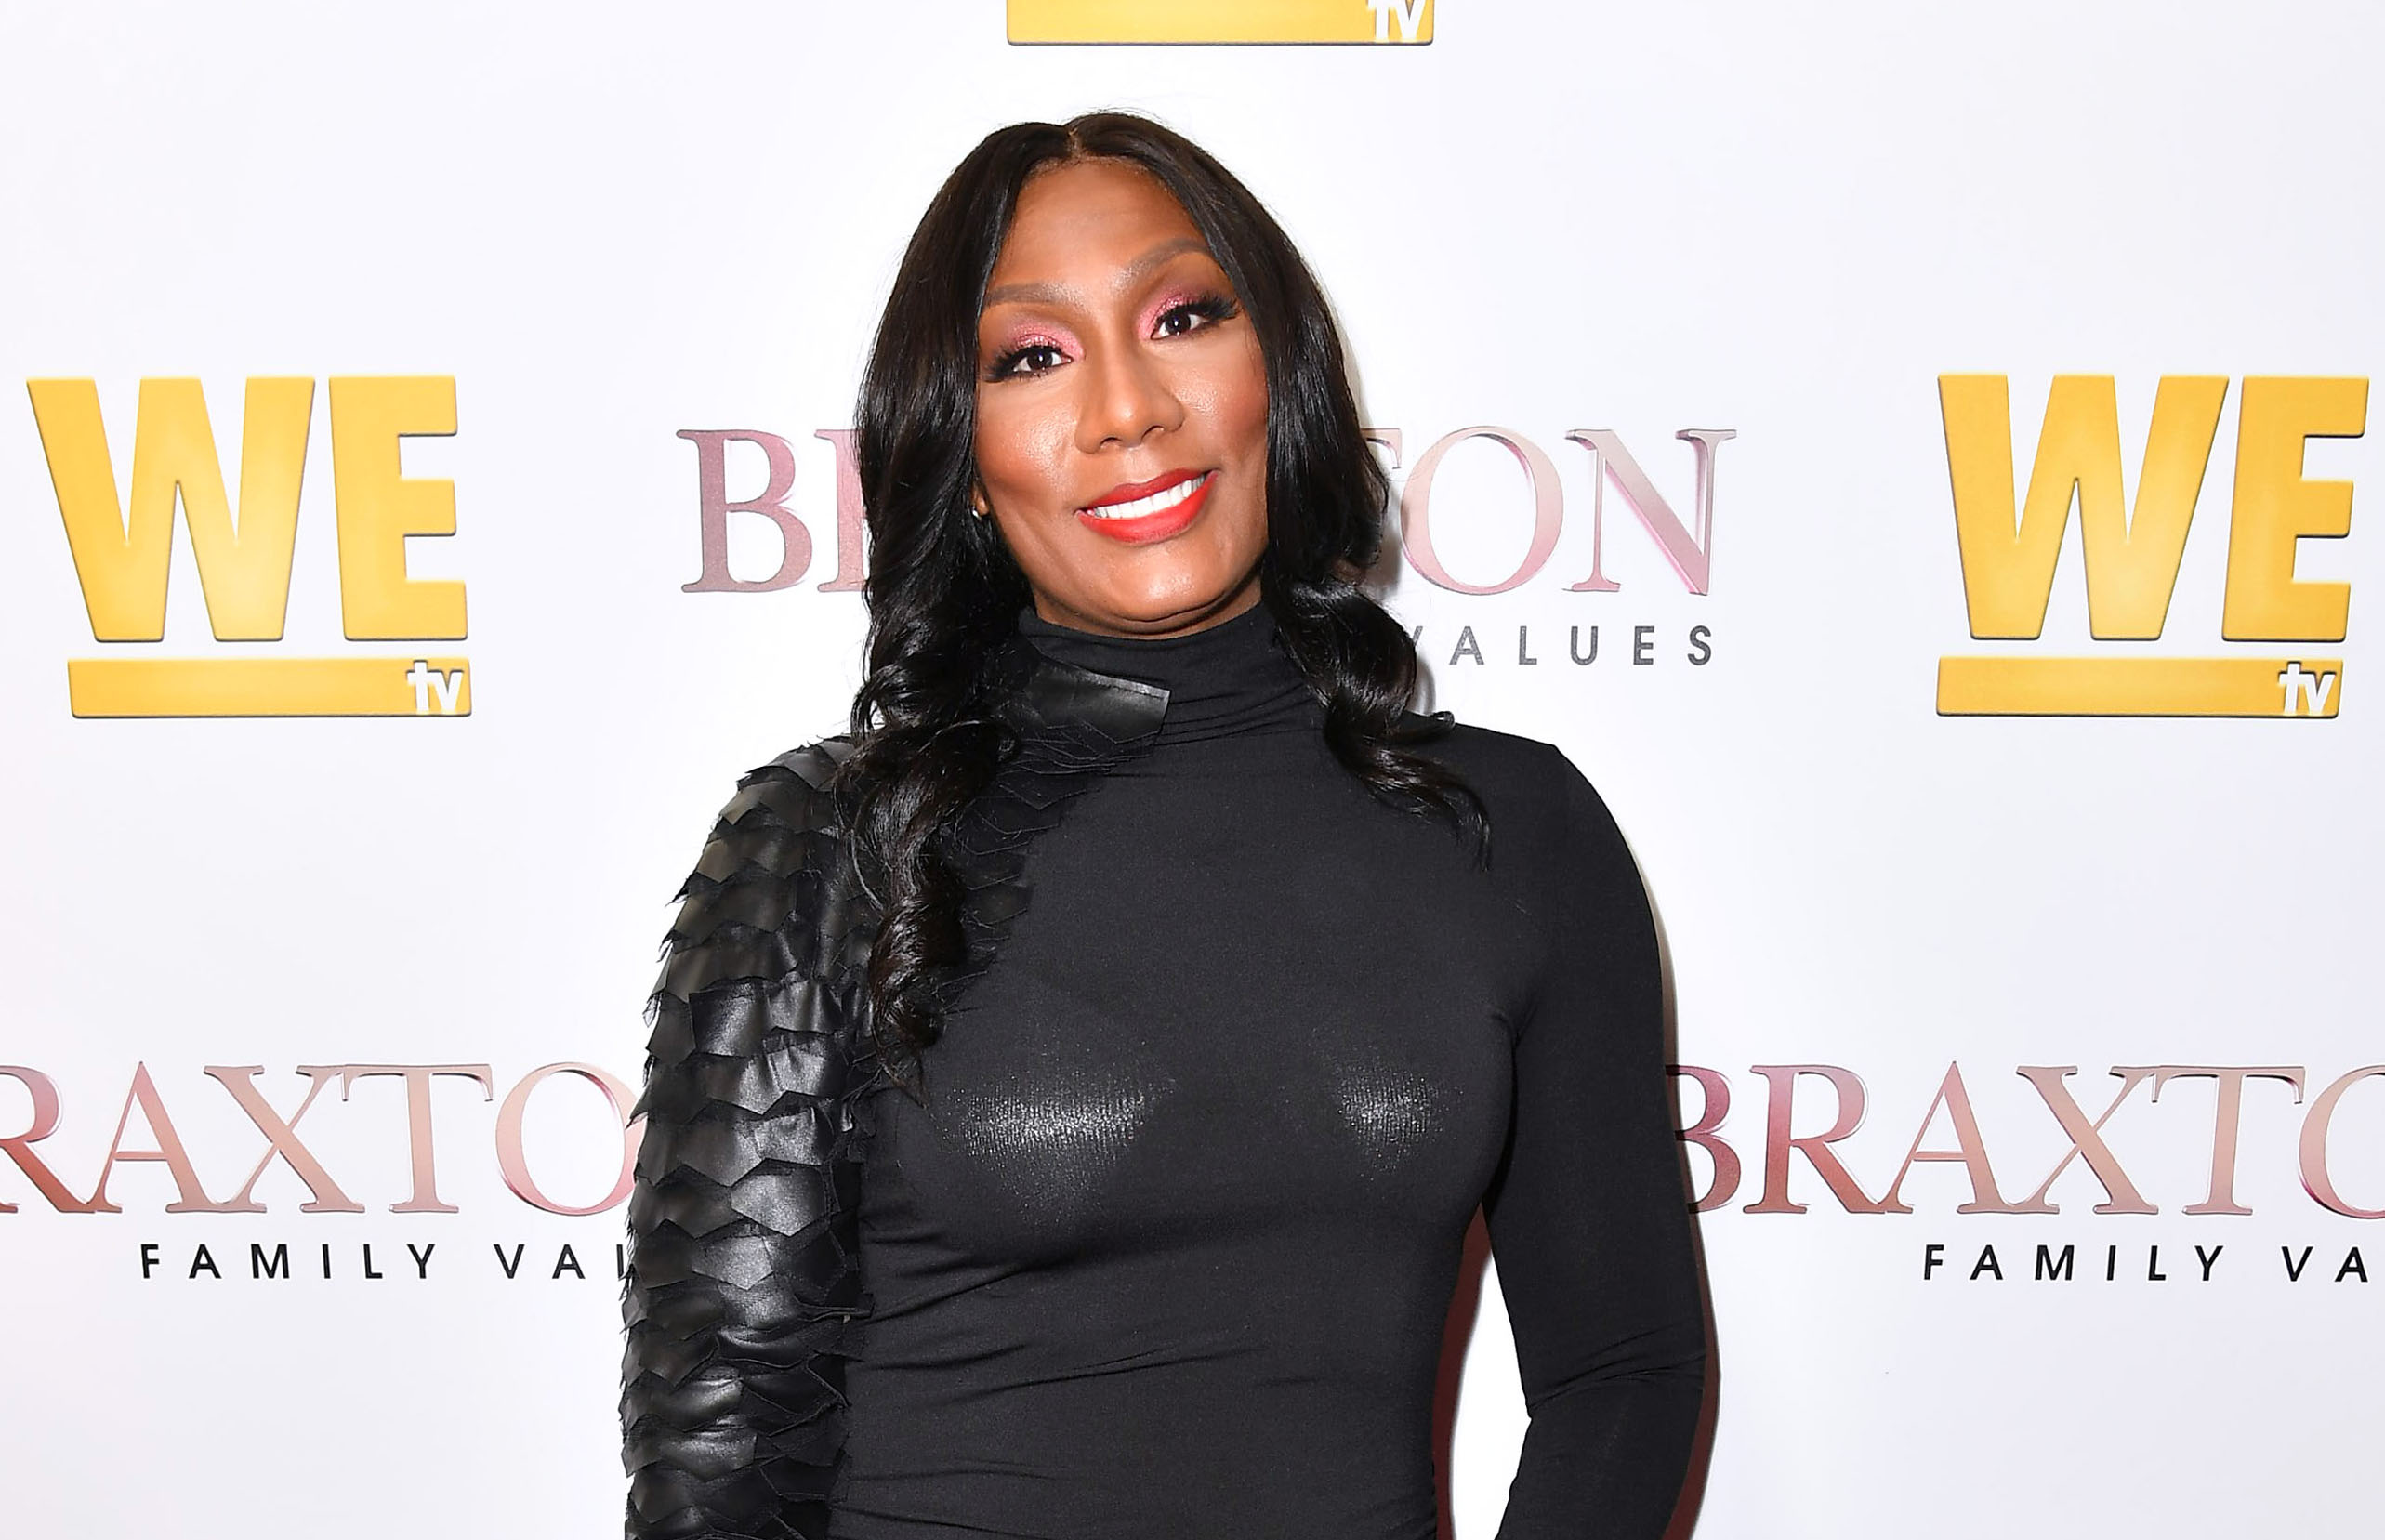 Towanda Braxton (“Braxton Family Values”) facing a $76,000 fraud charge by former landlord pic picture